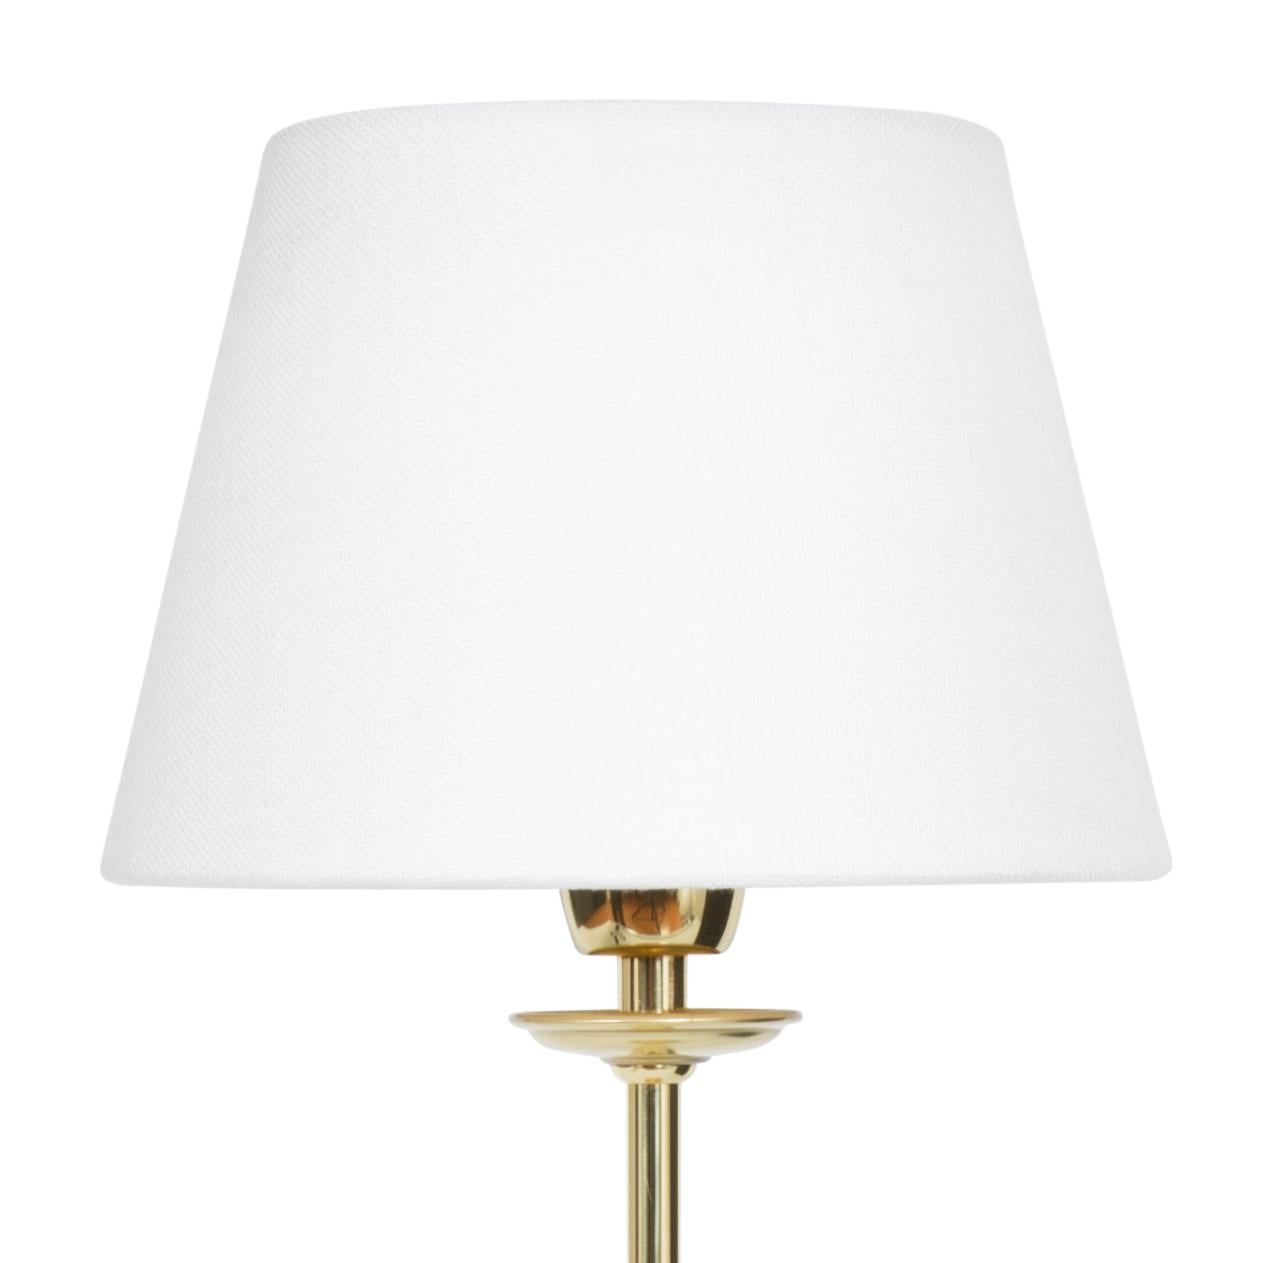 Lamp model Uno large polished brass table lamp designed by Konsthantverk and manufactured by themselves.

The production of lamps, wall lights and floor lamps are manufactured using craftsman’s techniques with the same materials and techniques as